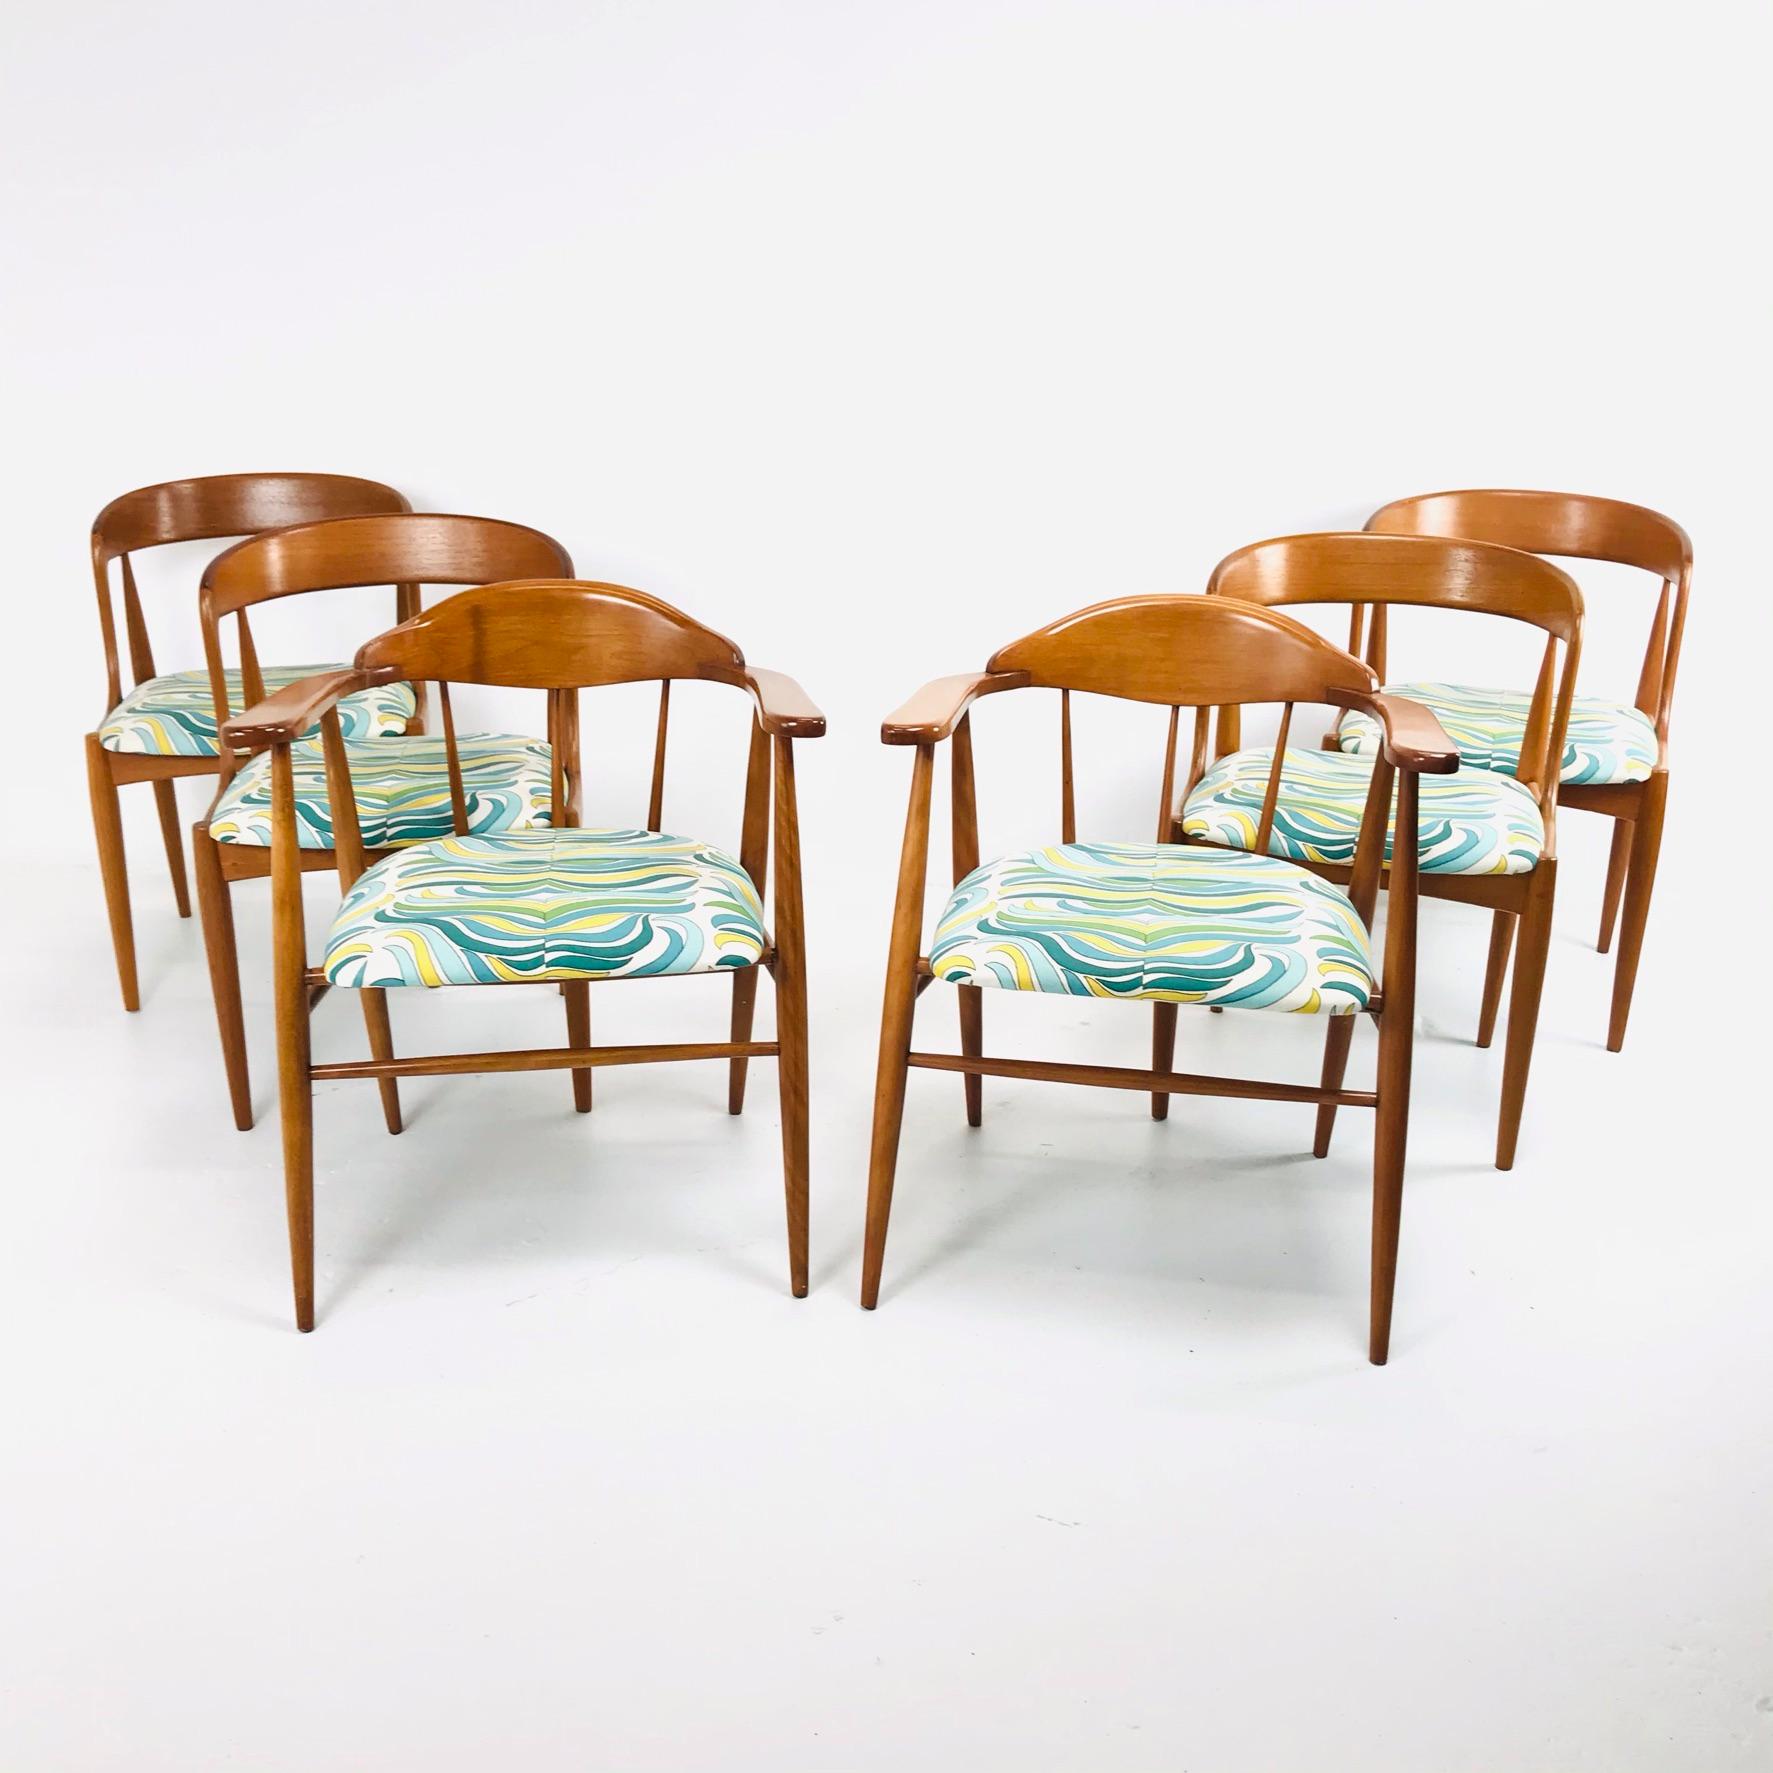 Set of 6 midcentury teak dining chairs. Includes 4 side chairs and 2 armchairs. Upholstery is in great condition and chairs are structurally sound. One chair has a break that has been repaired (pictured), otherwise set is in good vintage